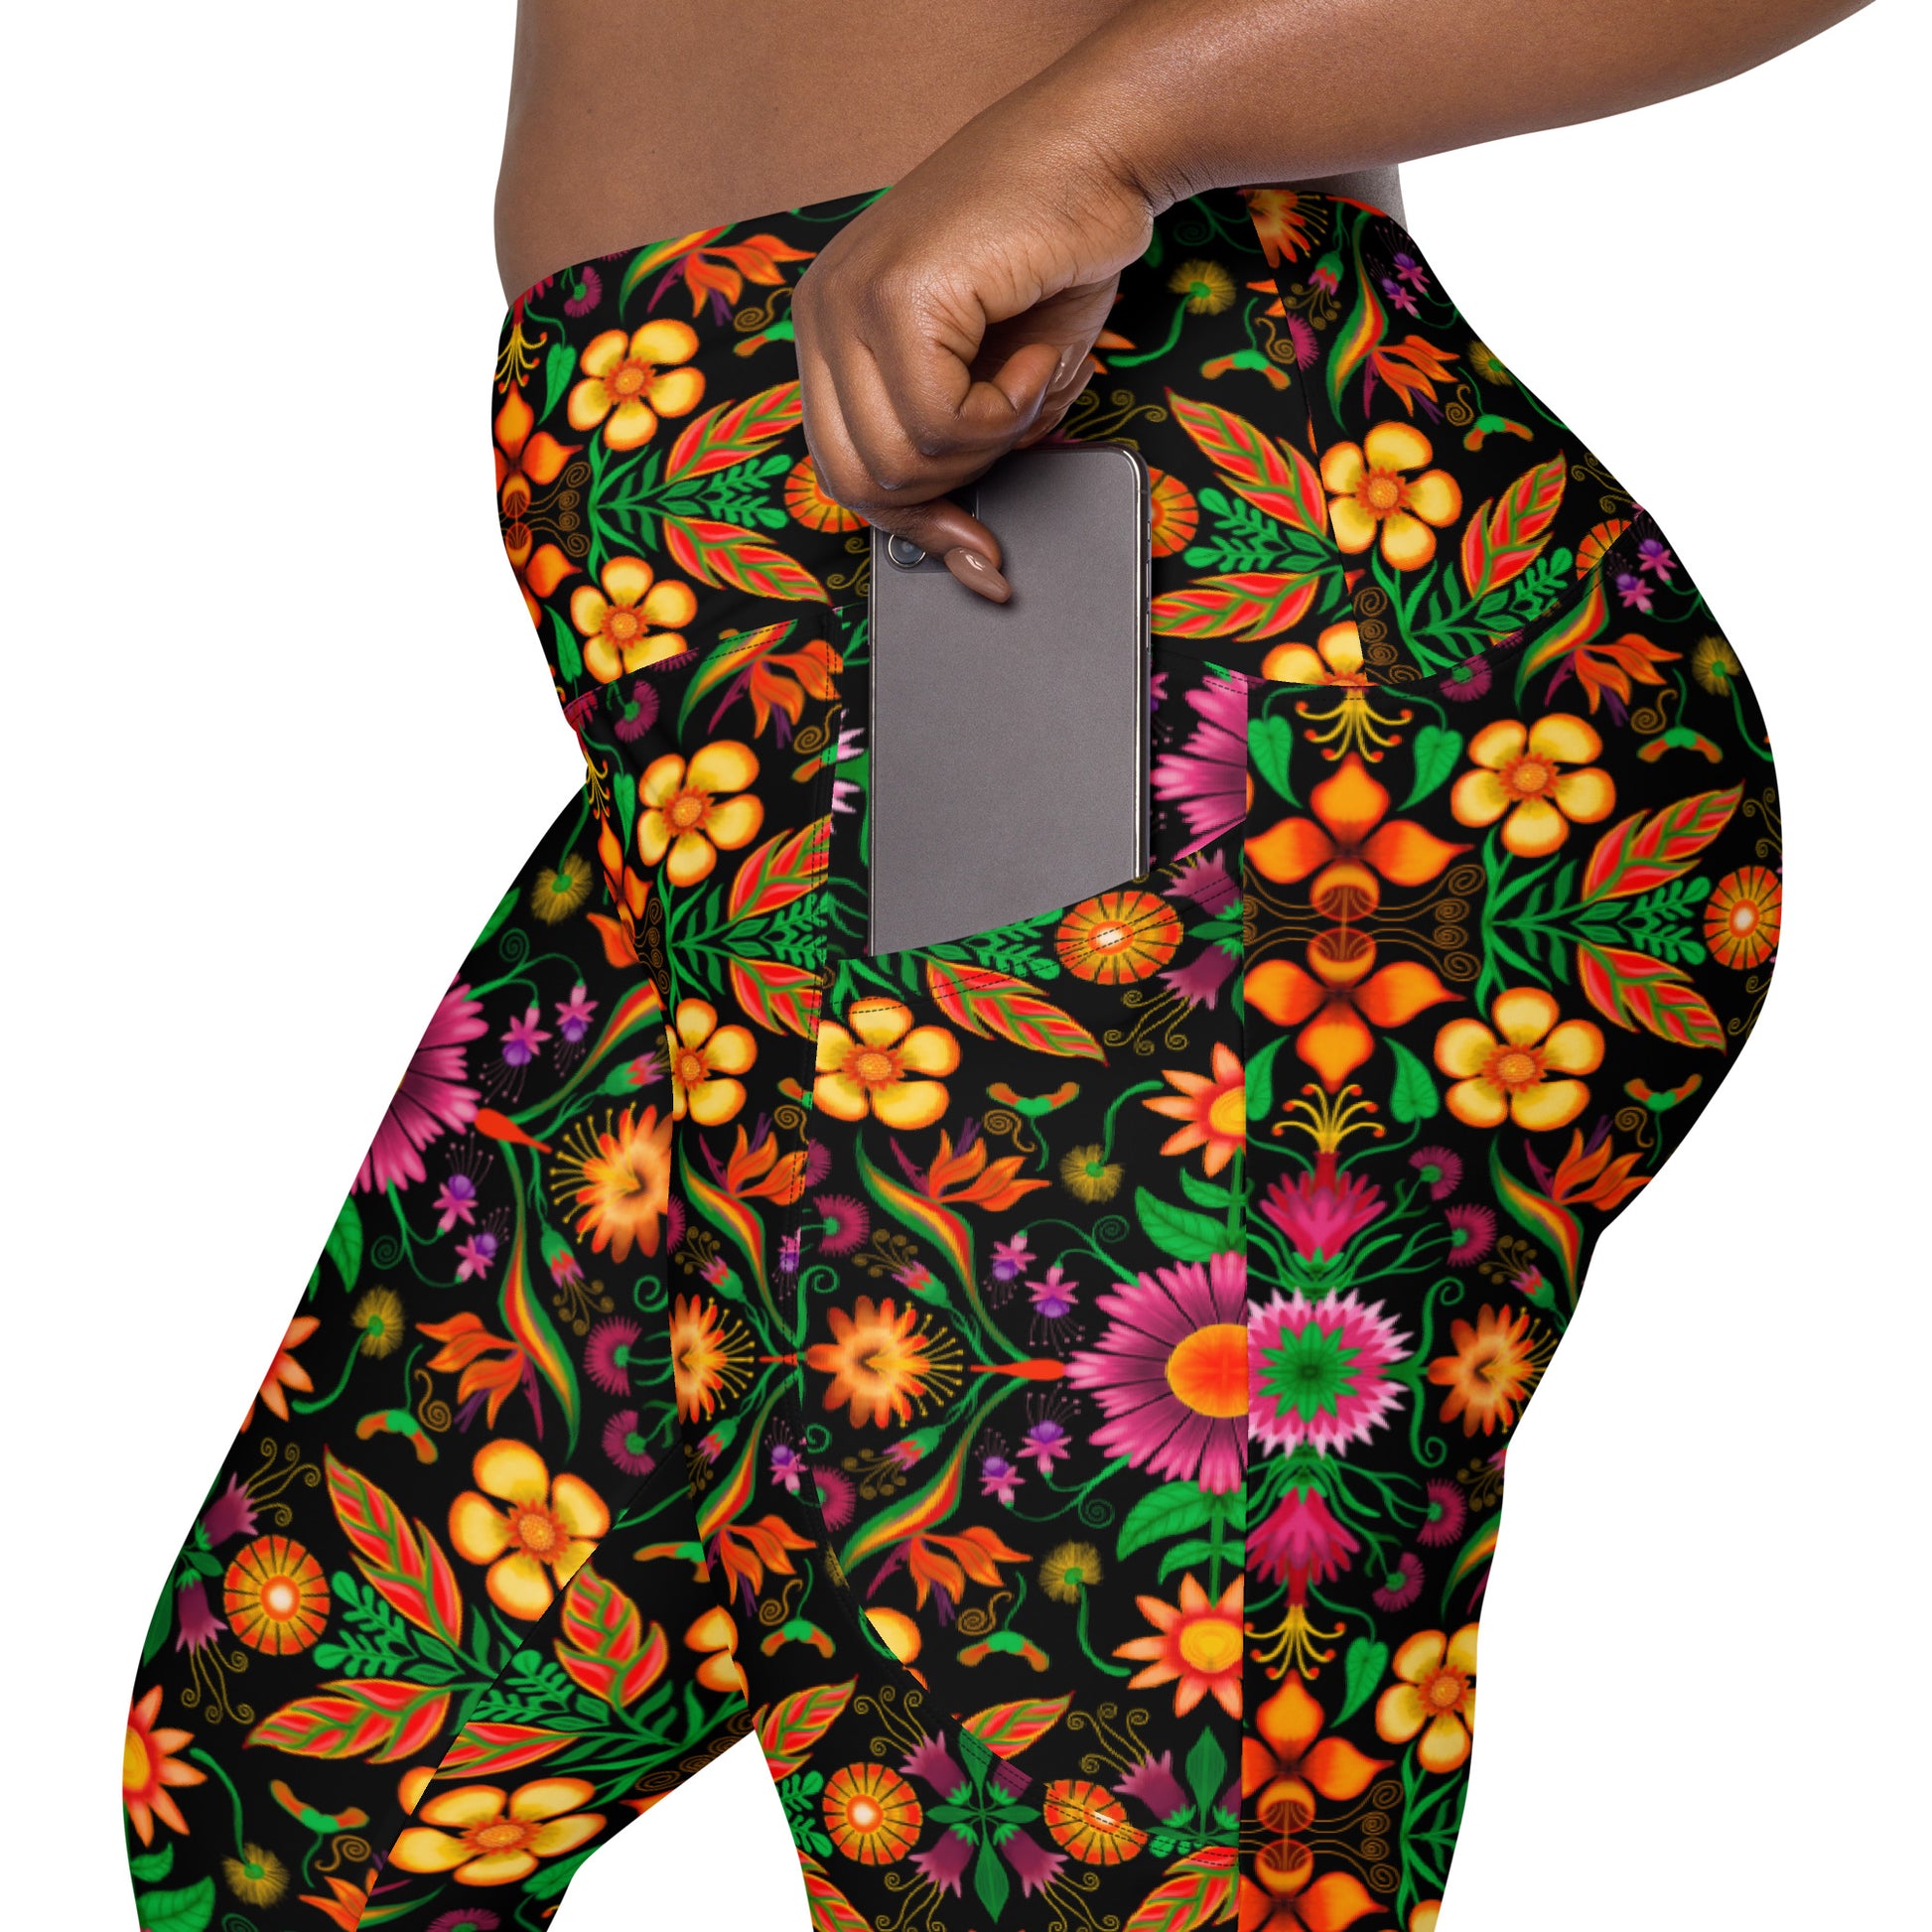 Wild flowers in a luxuriant jungle Crossover leggings with pockets. Pocket details